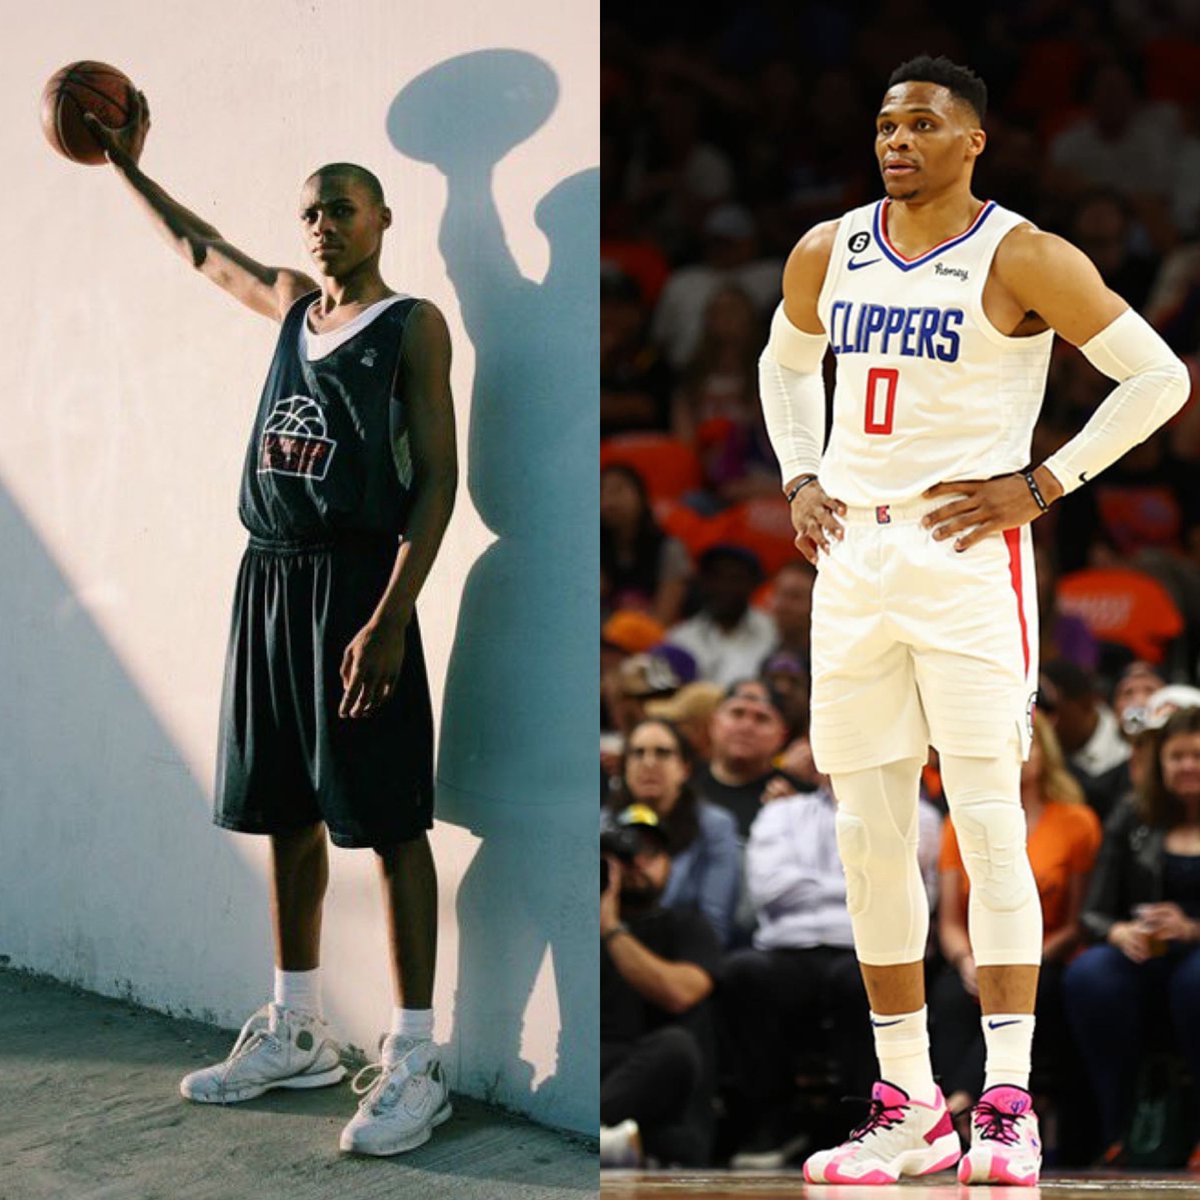 Russell Westbrook in high school: ➩ 5'8' and 140 pounds as a freshman ➩ Didn’t start until he was a junior ➩ No recruiting letters until the summer of senior year Trust the process and put in the work.